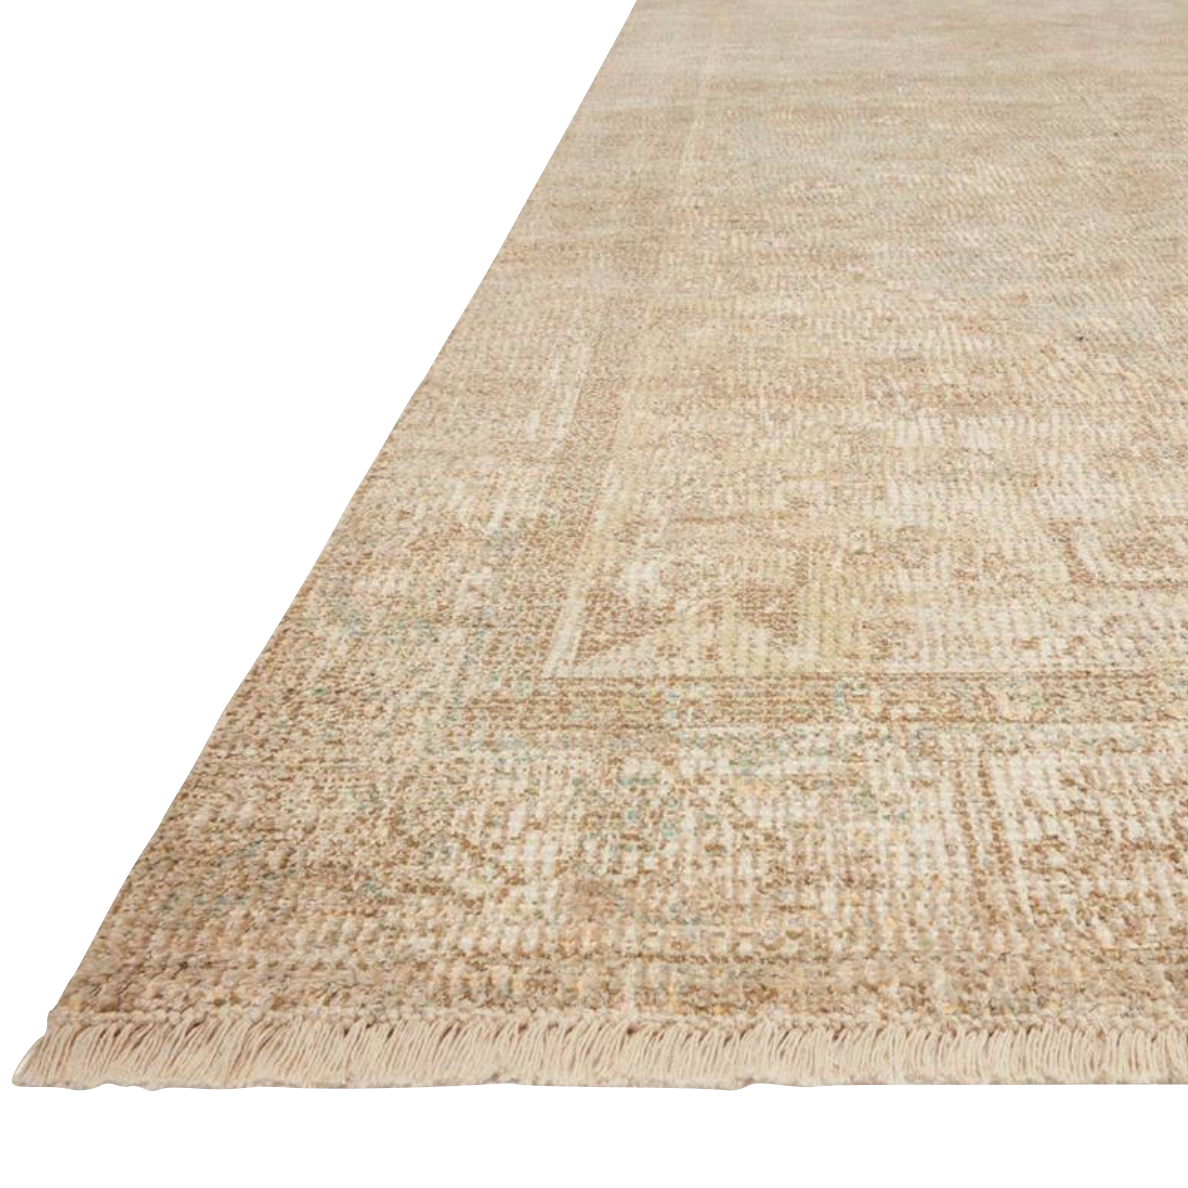 Hand-woven by skilled artisans, the Priya Ocean / Ivory Area Rug from Loloi offers beautiful tonal designs accentuated by a carefully curated color palette. Delicate yet strong, Priya is an instant classic made for today's home.  Hand Woven 51% Cotton | 28% Polyester | 12% Viscose | 9% Wool PRY-01 Ocean/Ivory Colors: Taupe, Ivory, Brown